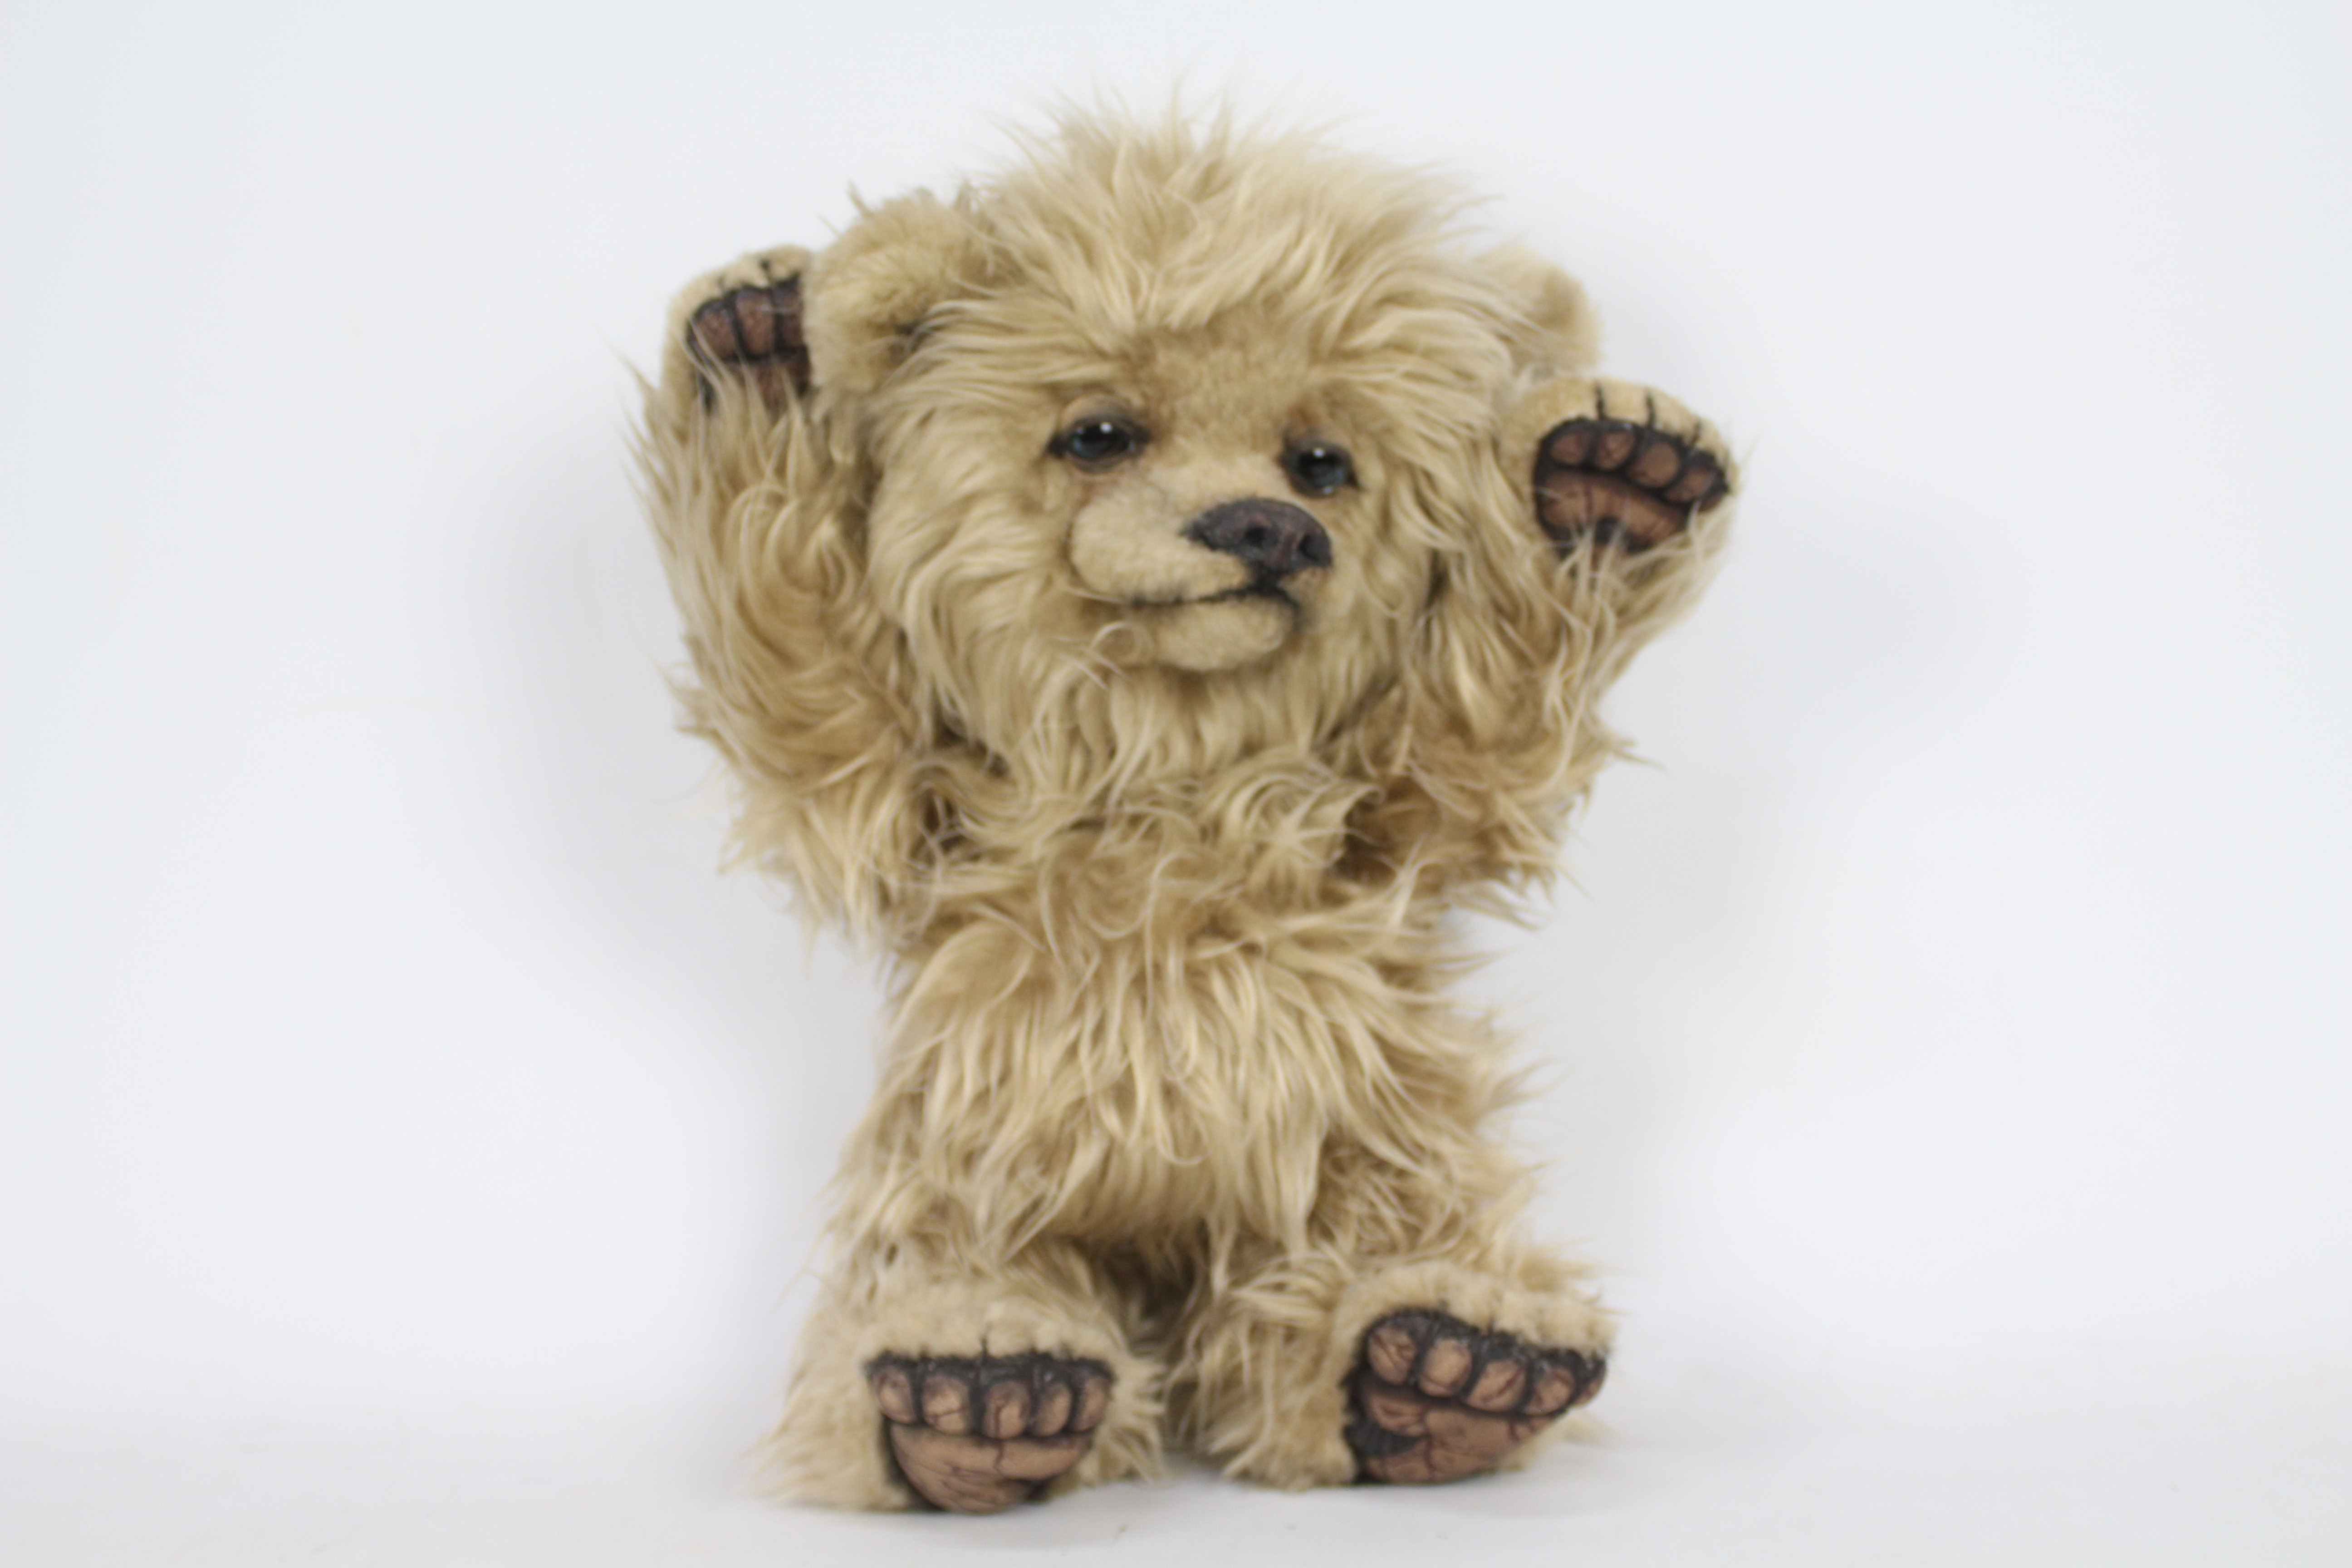 Melisa's Bears - A one of a kind golden faux fur bear named Lizzie made by the Canadian company - Image 3 of 4